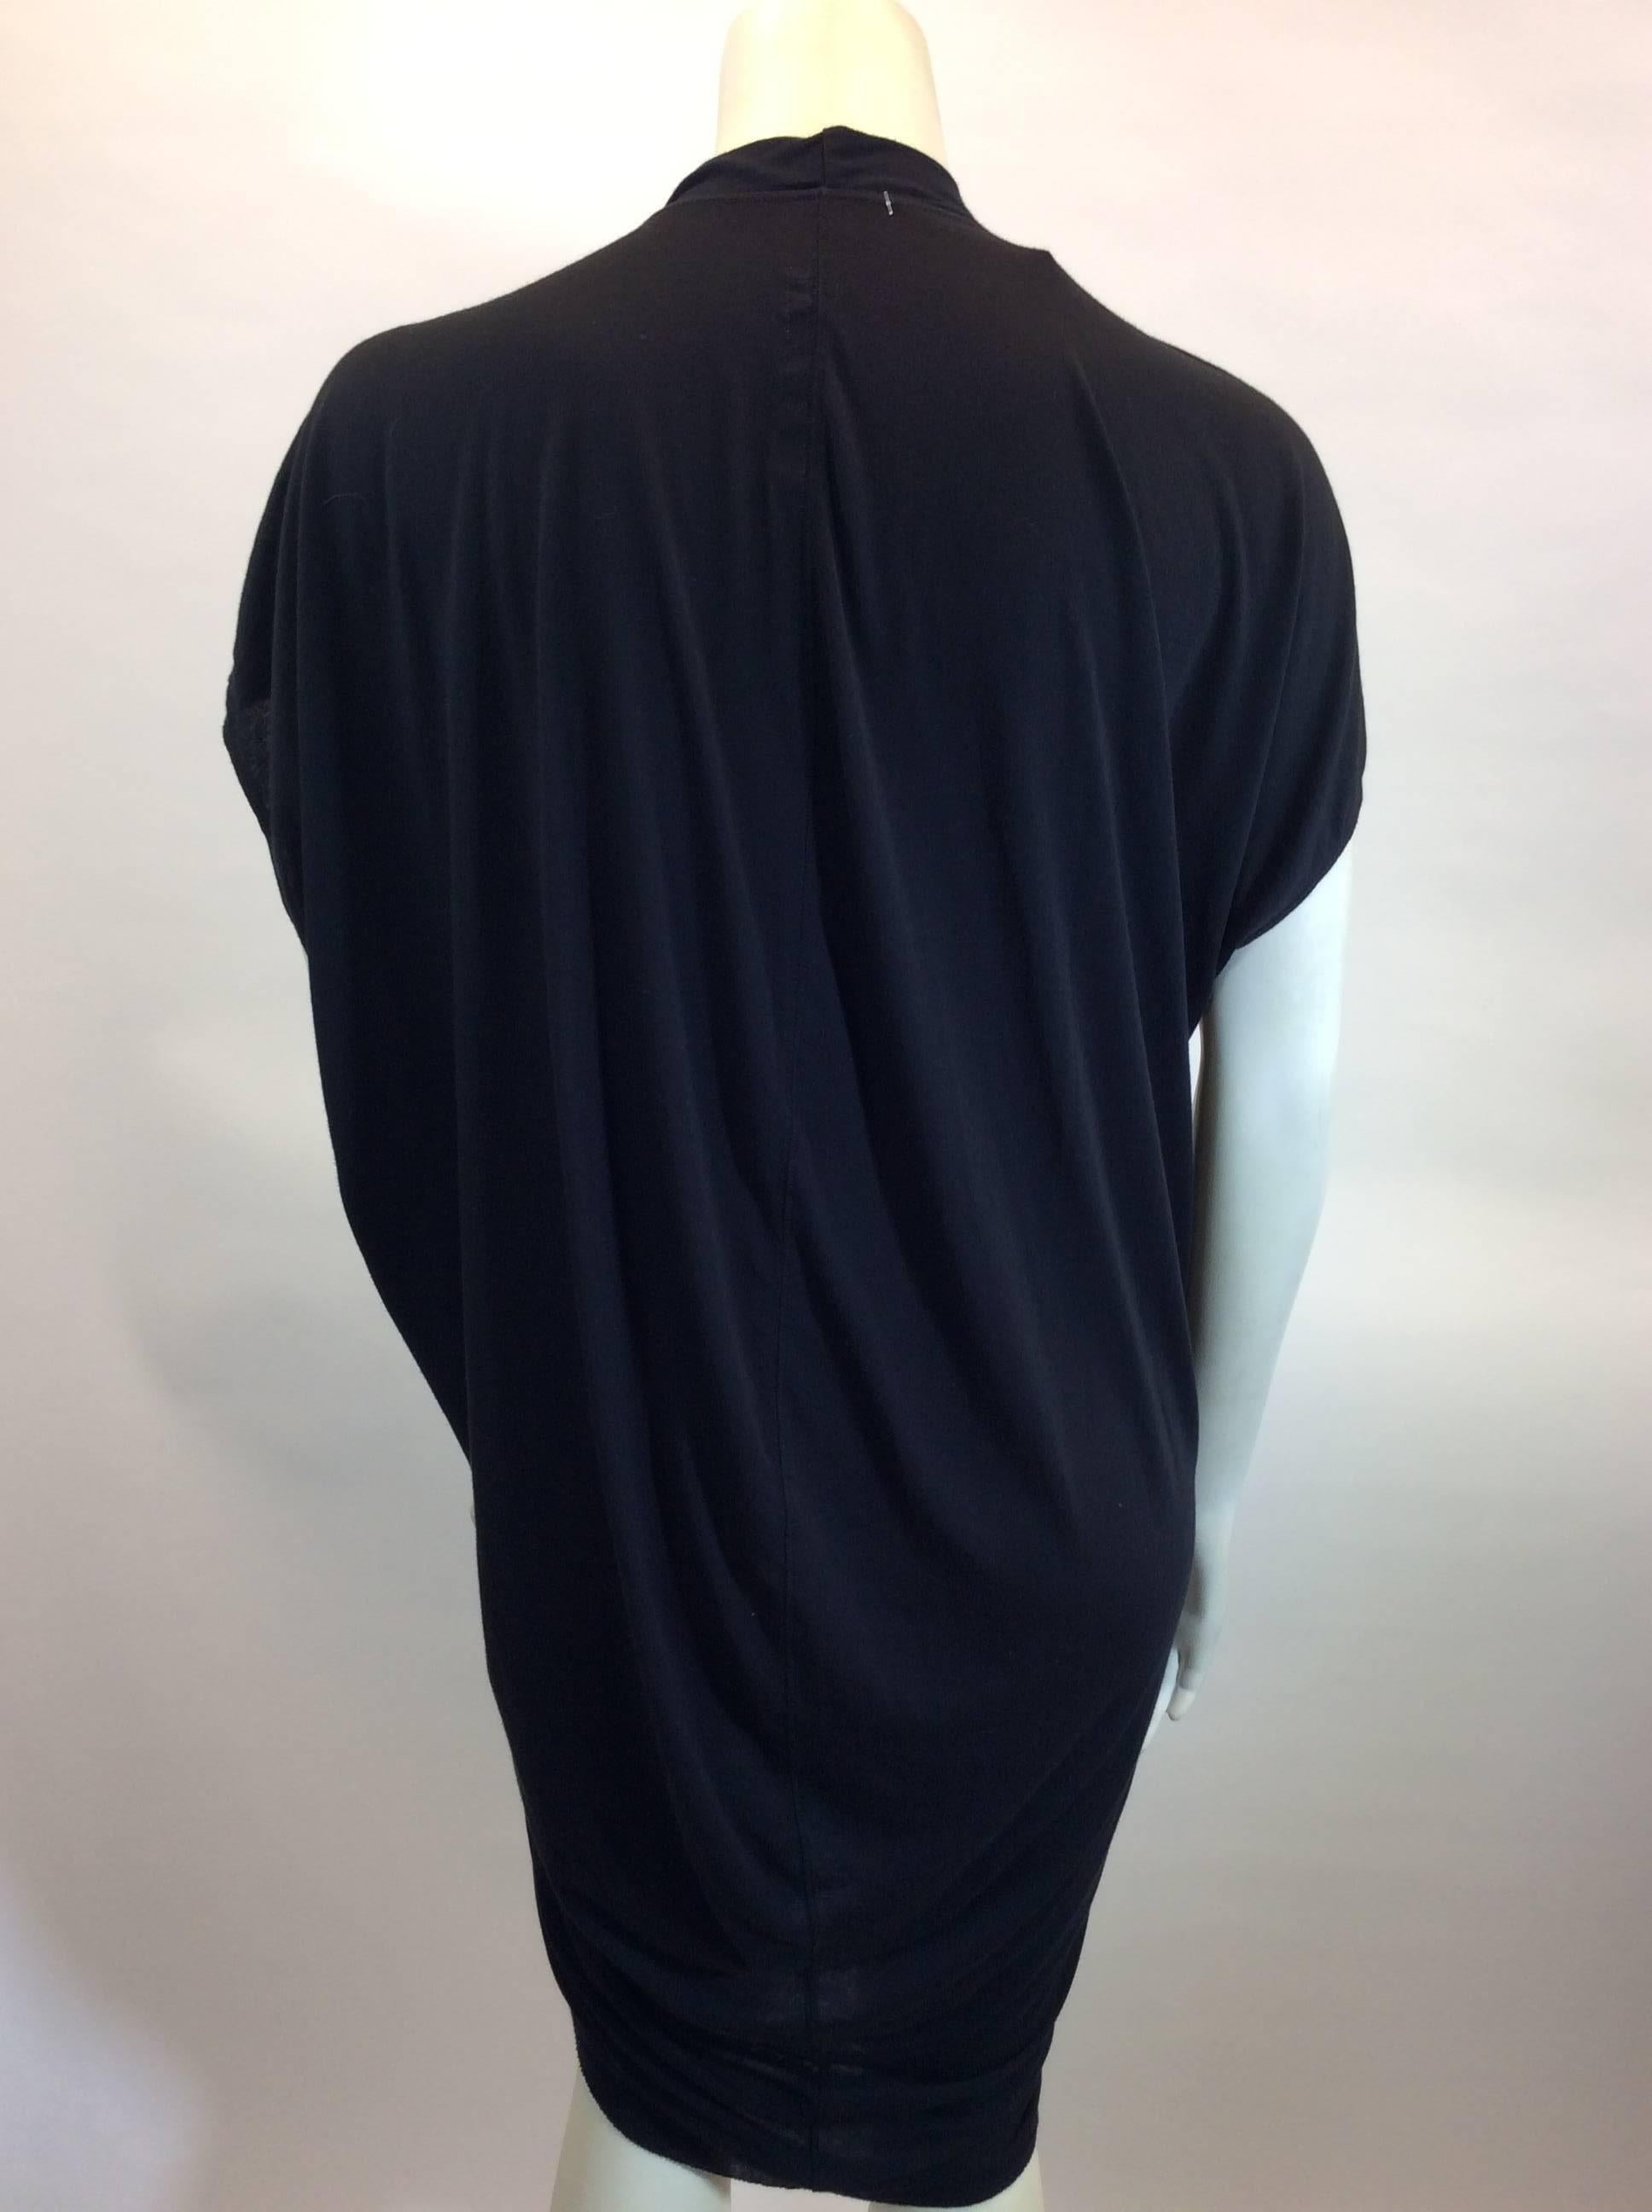 Rick Owens Black Center Seam Draped Dress In Excellent Condition For Sale In Narberth, PA